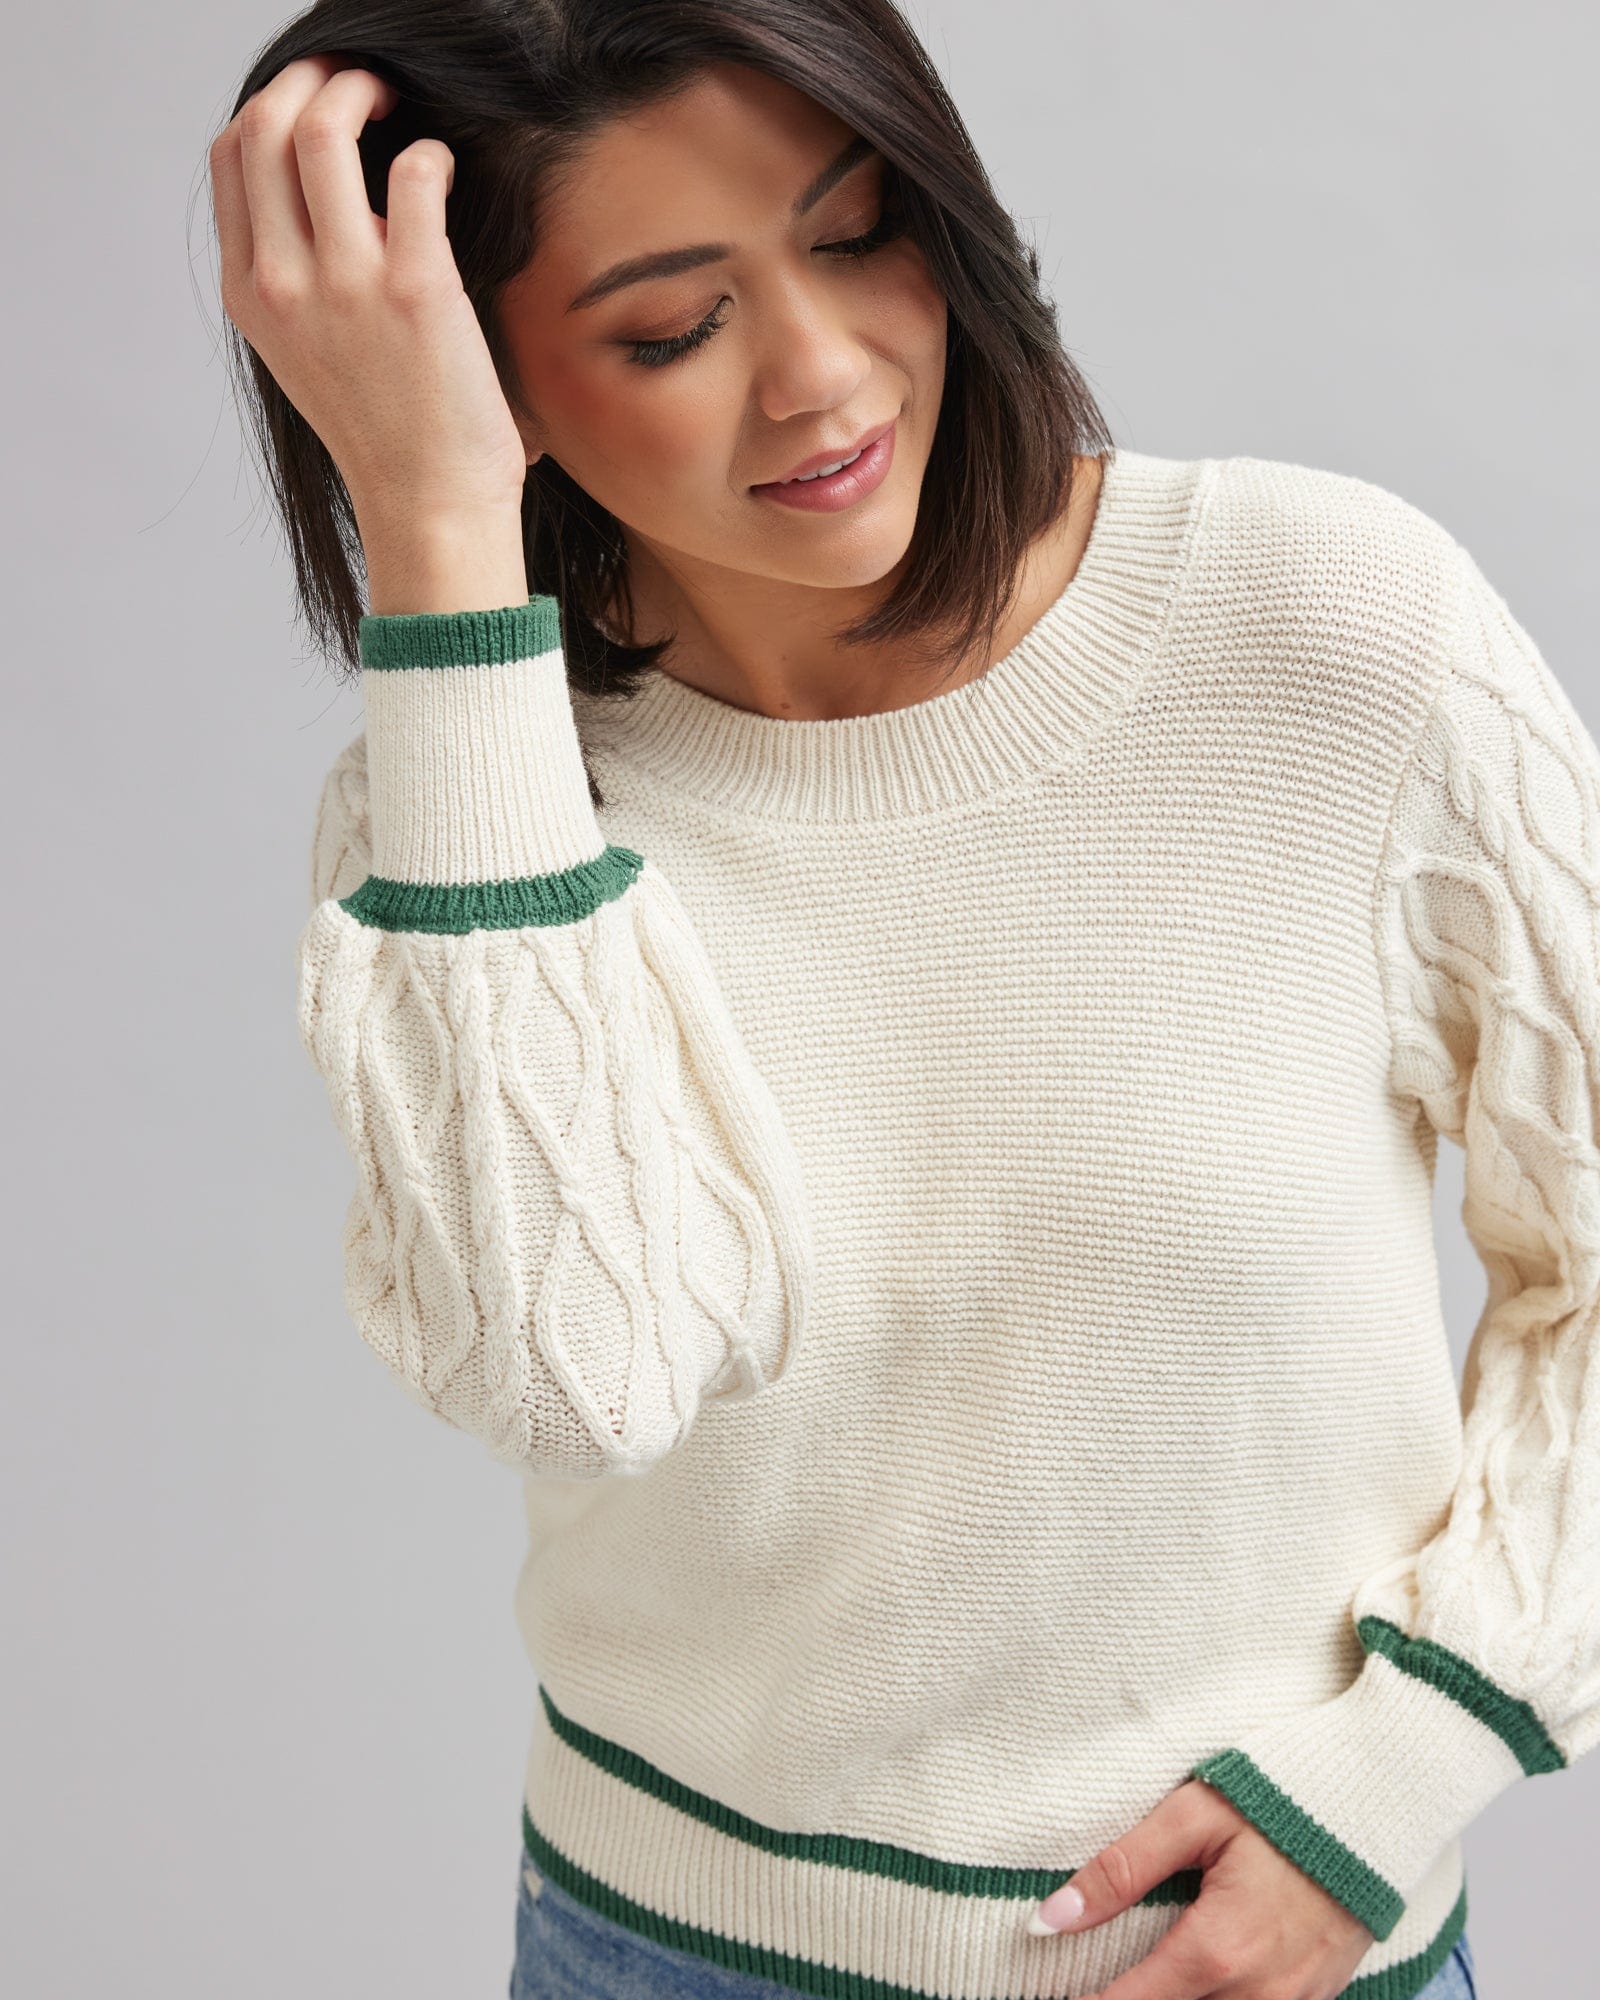 Woman in a cream colored sweater with green accents